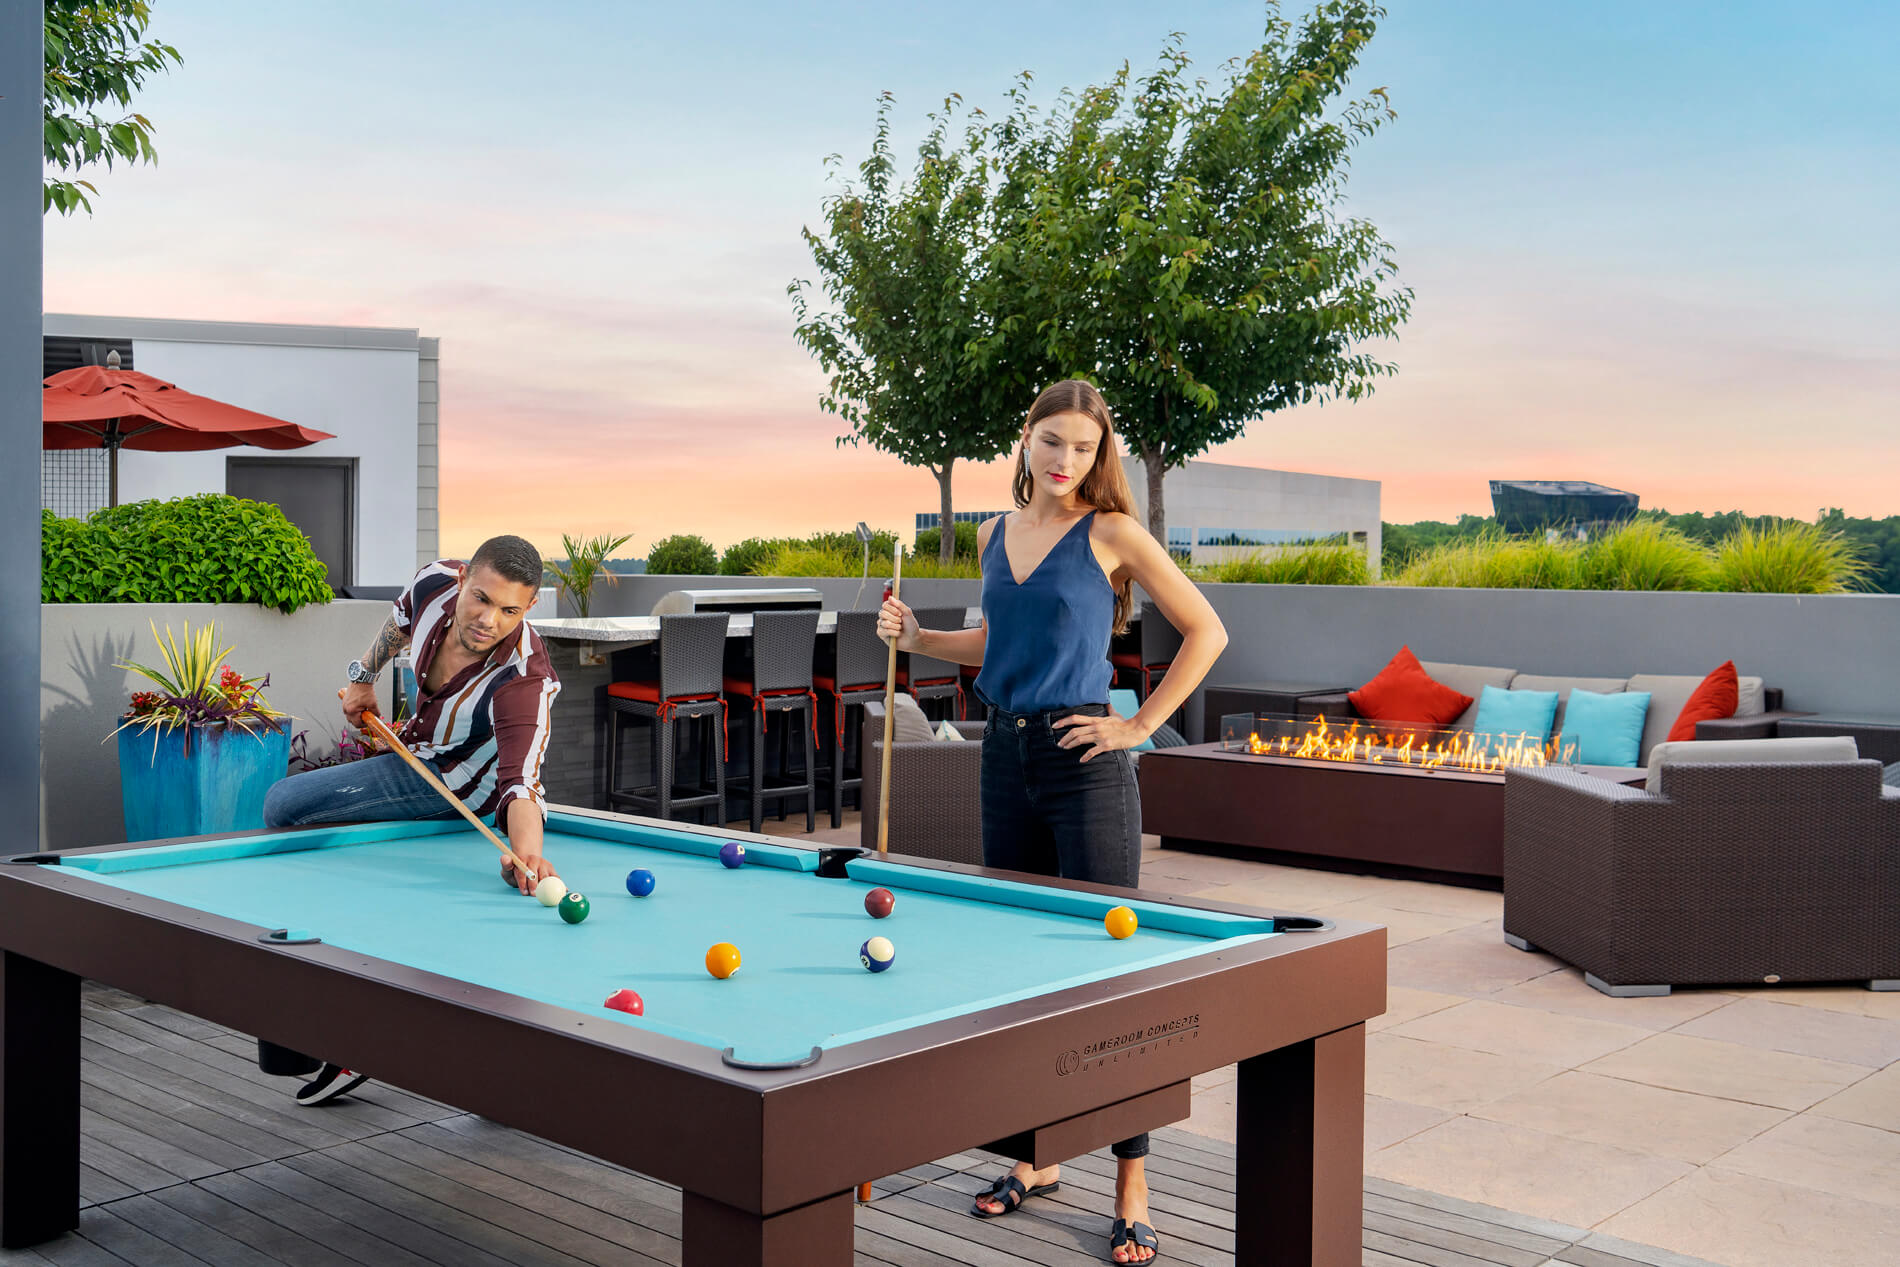 Couple playing pool on rooftop